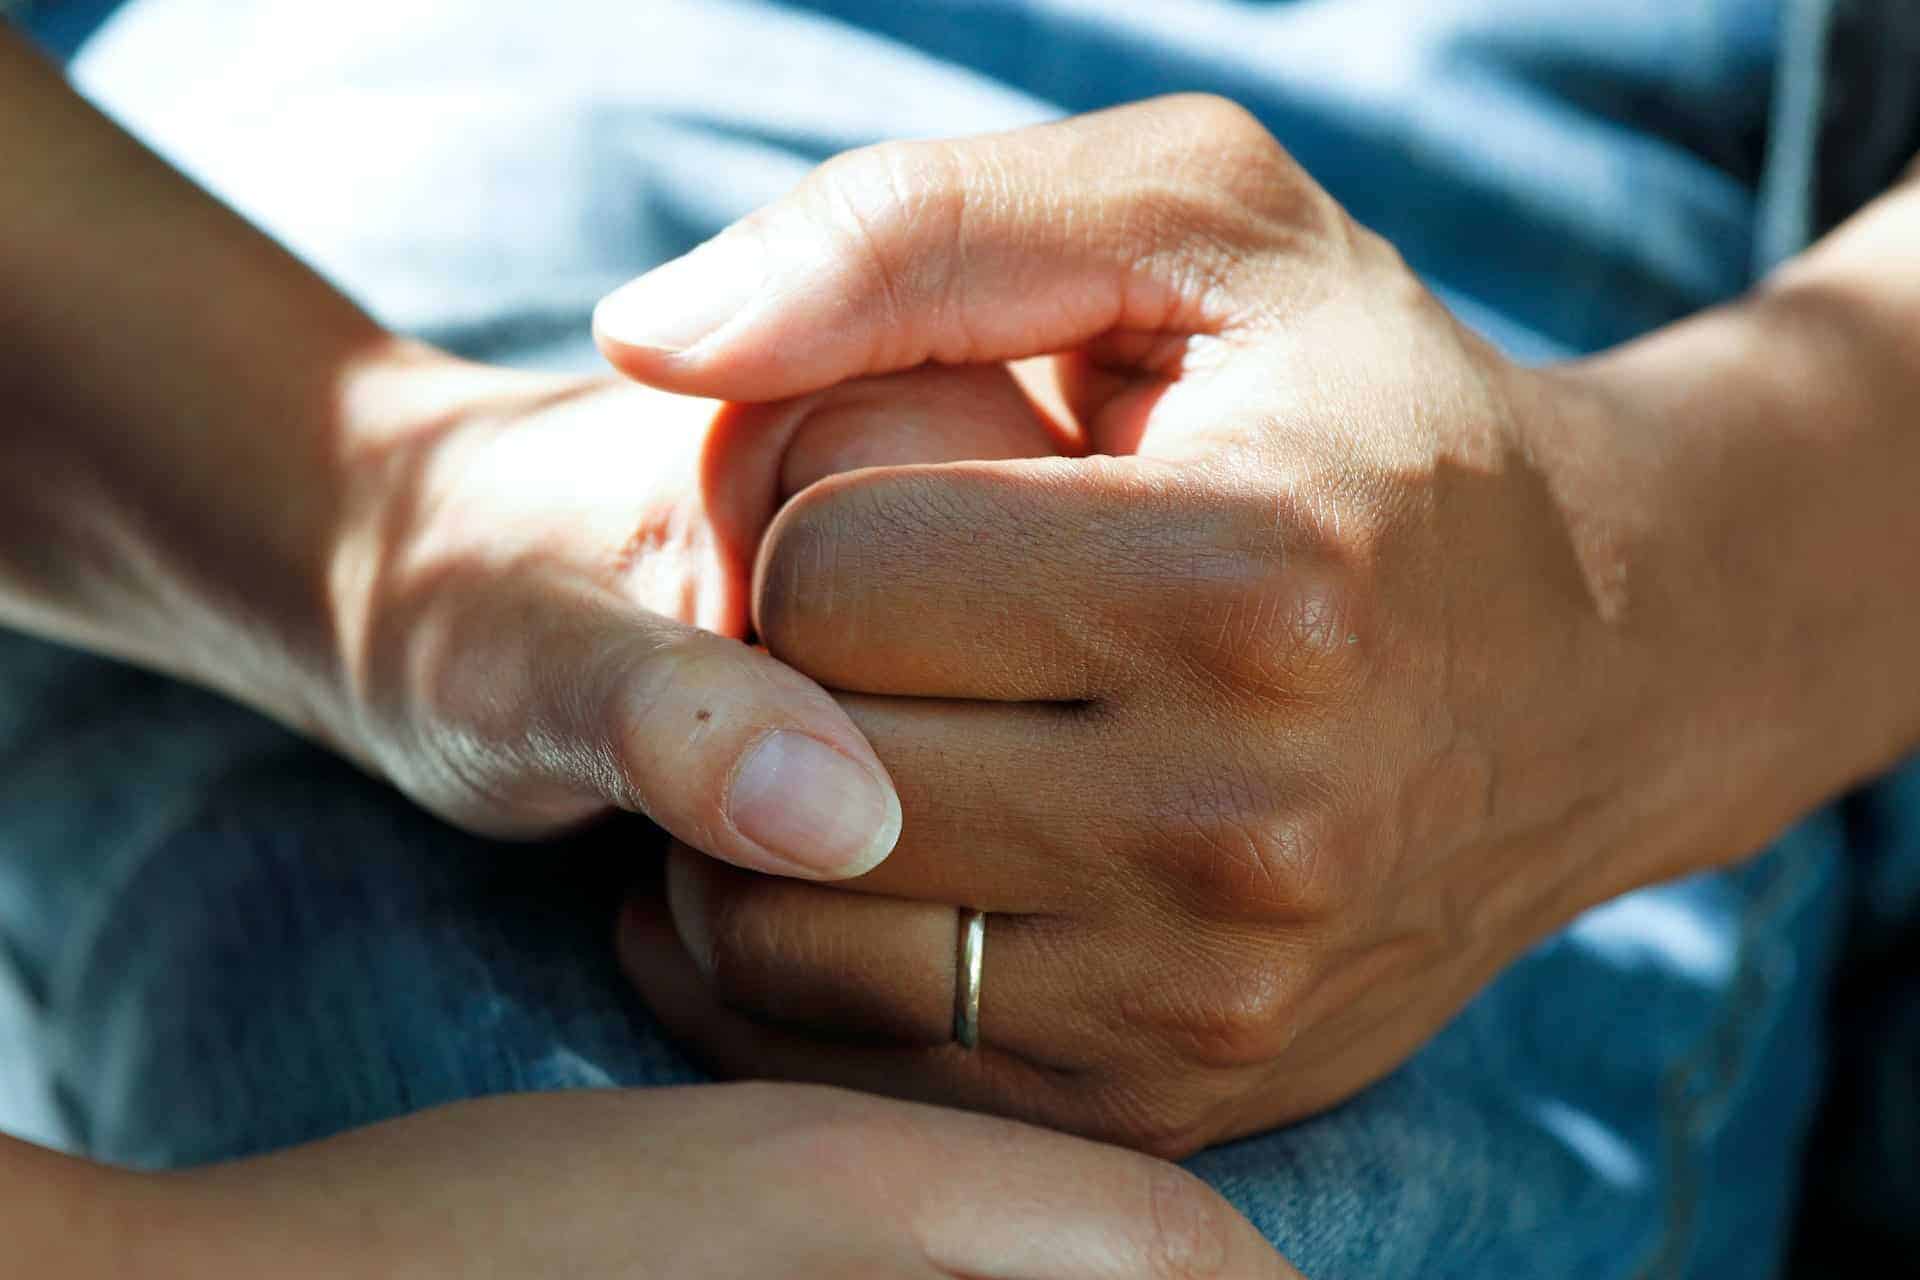 Two people in the care sector holding hands in a comforting and supportive gesture.